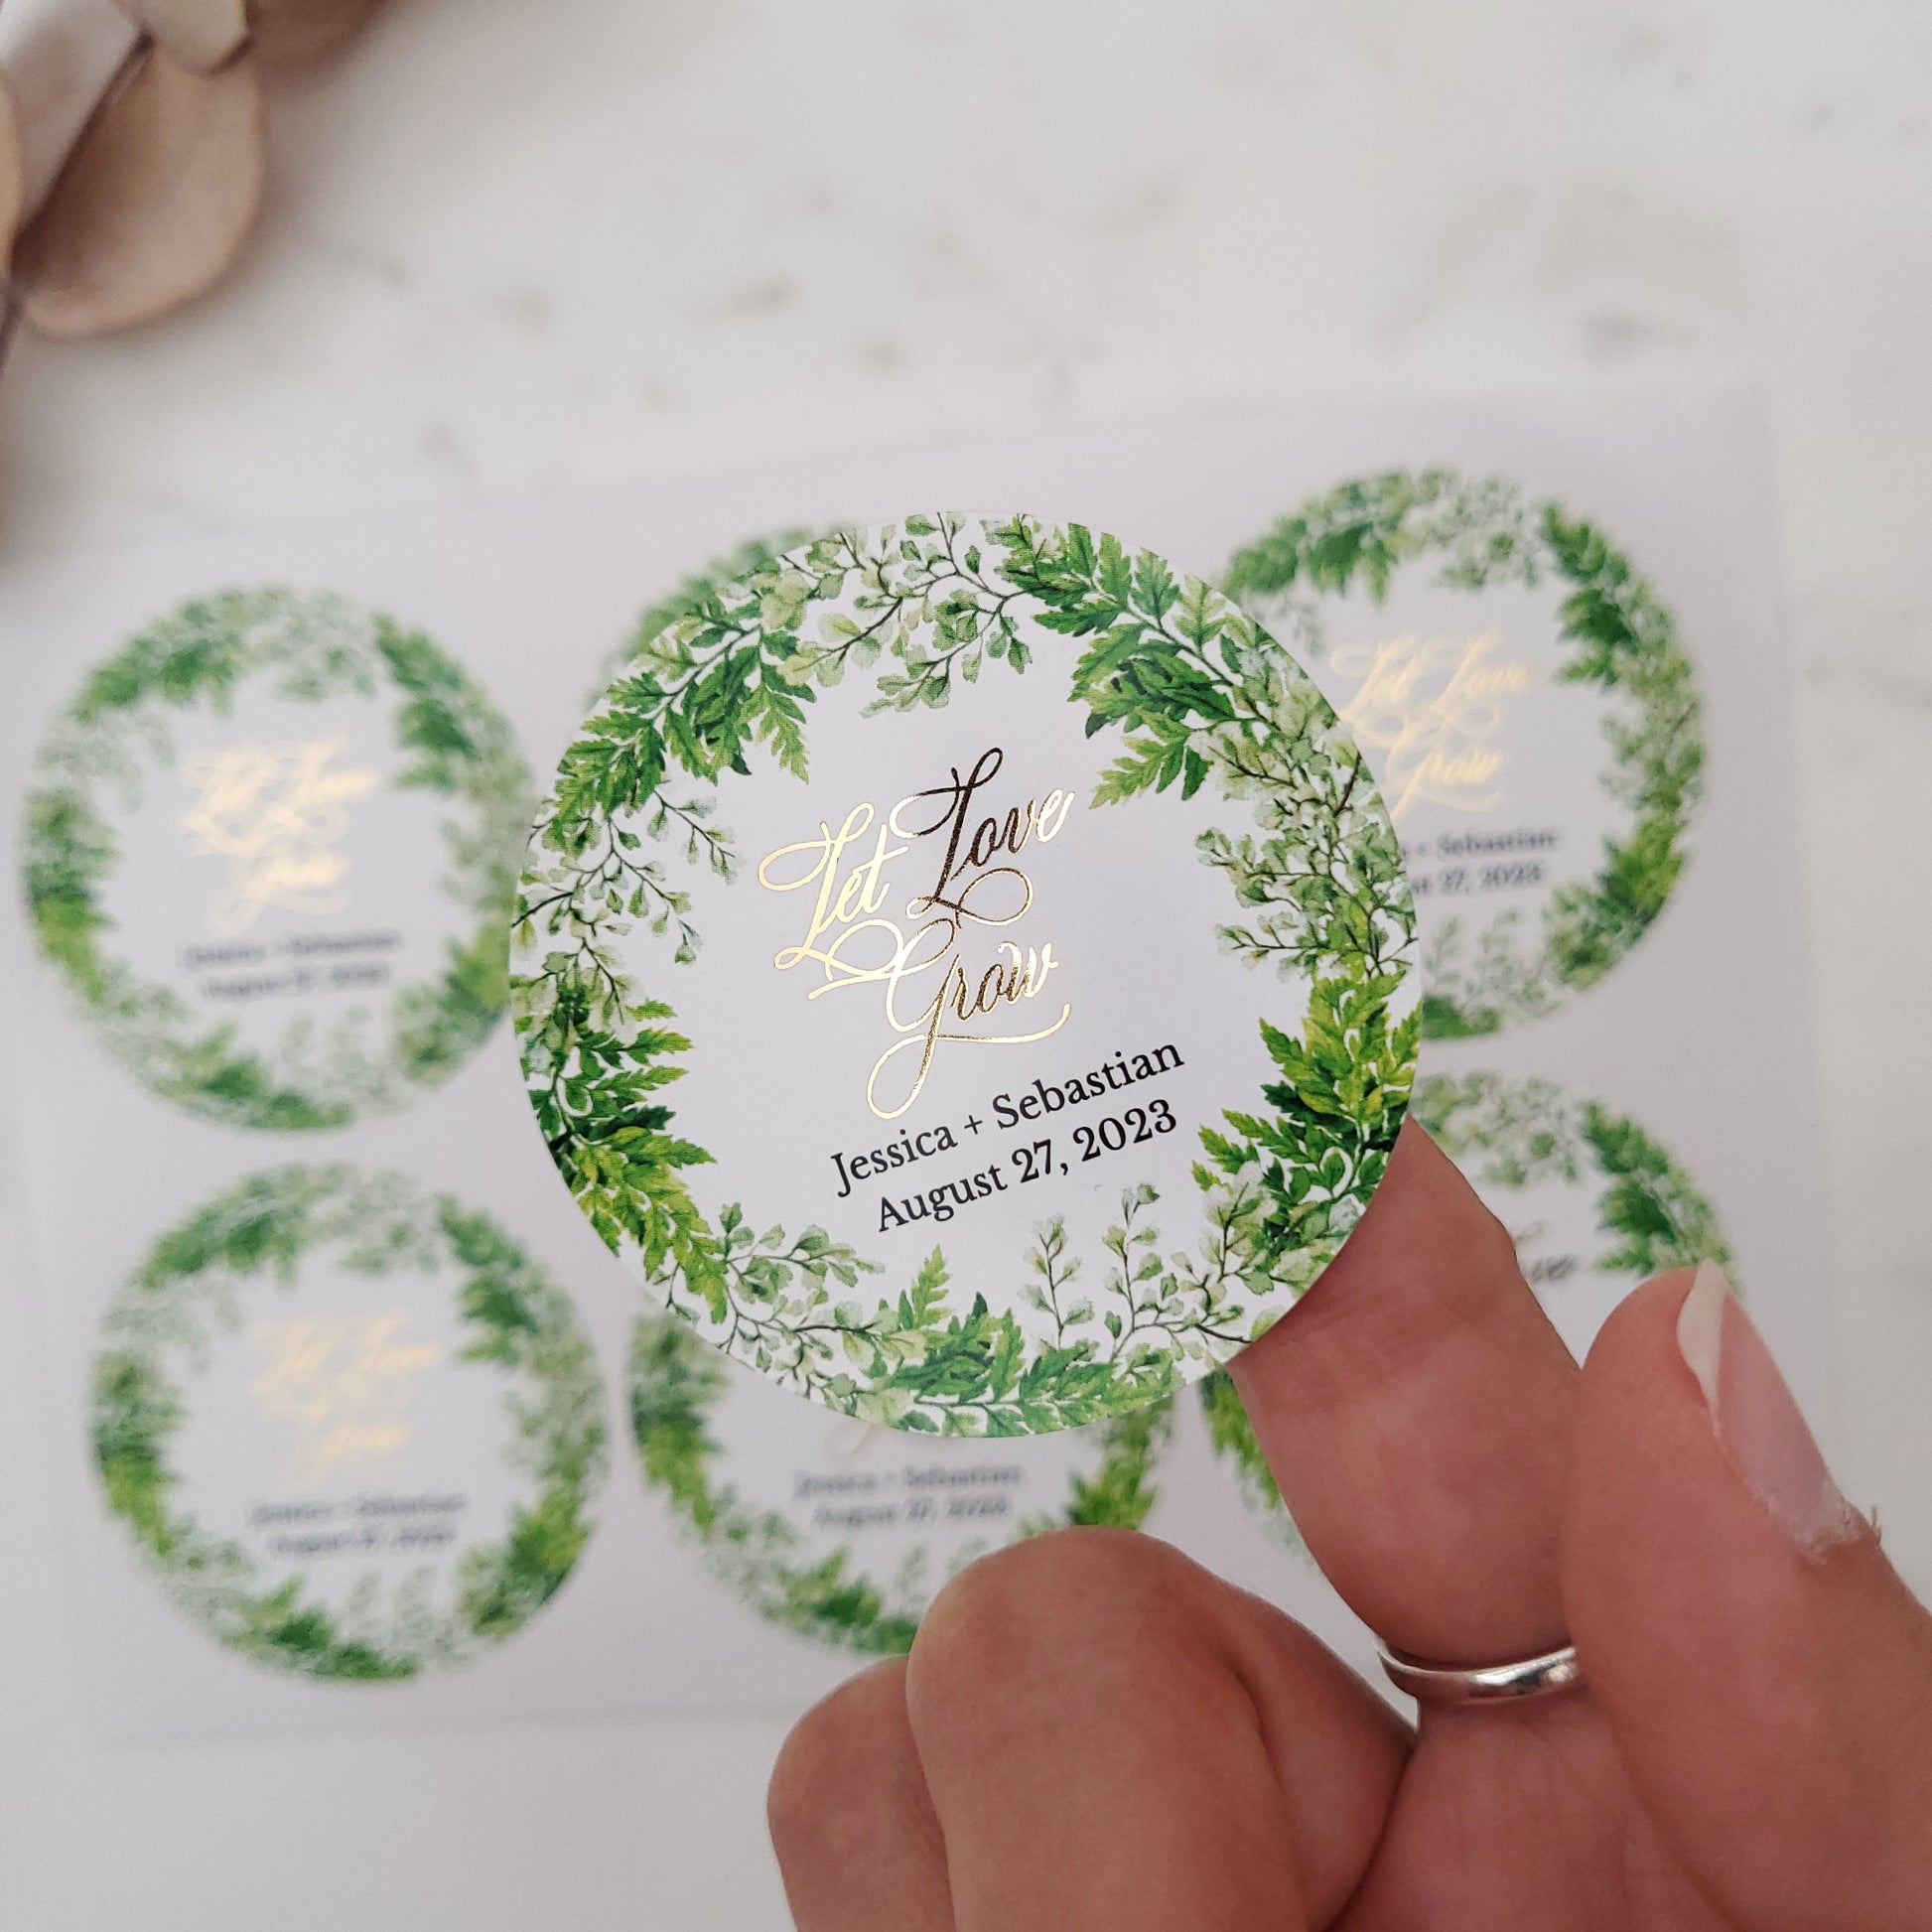 Personalized let love grow wedding favor stickers - XOXOKristen